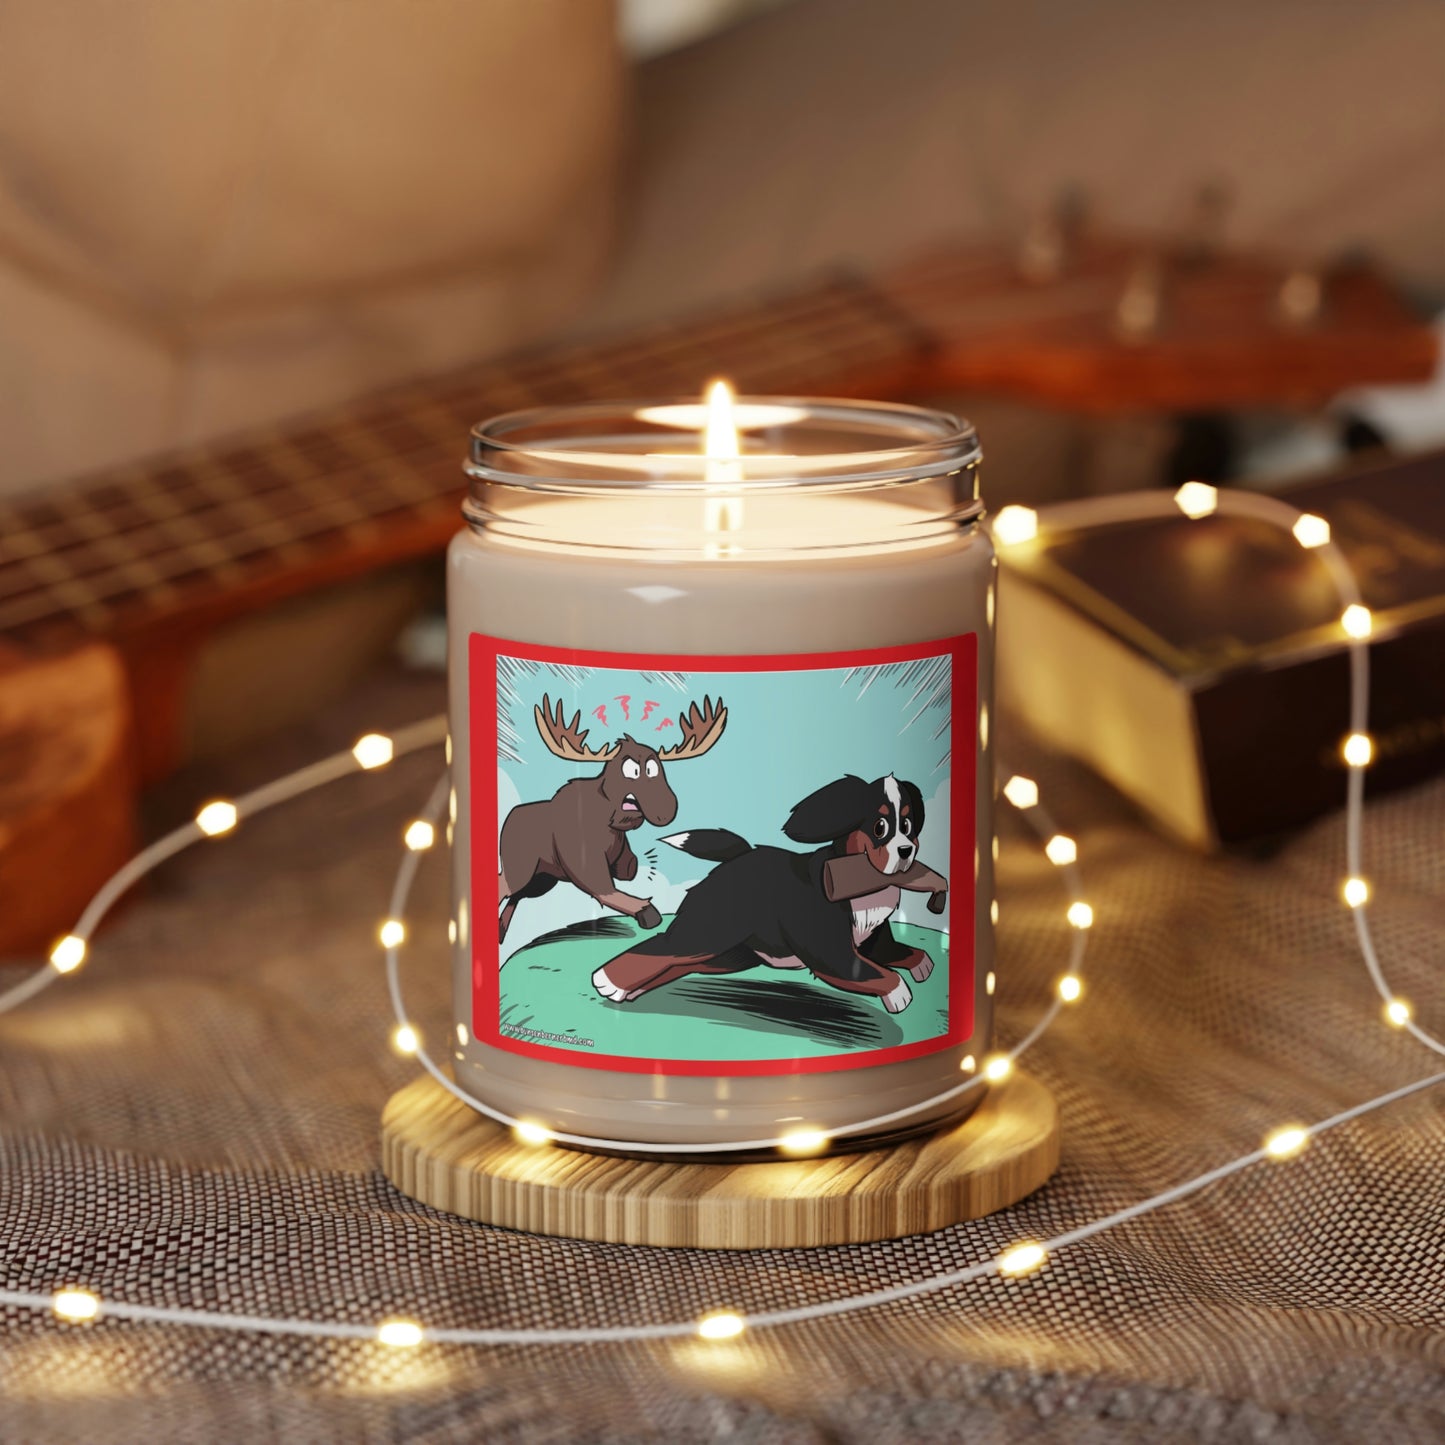 MOOSELEGS CANDLE SCENT